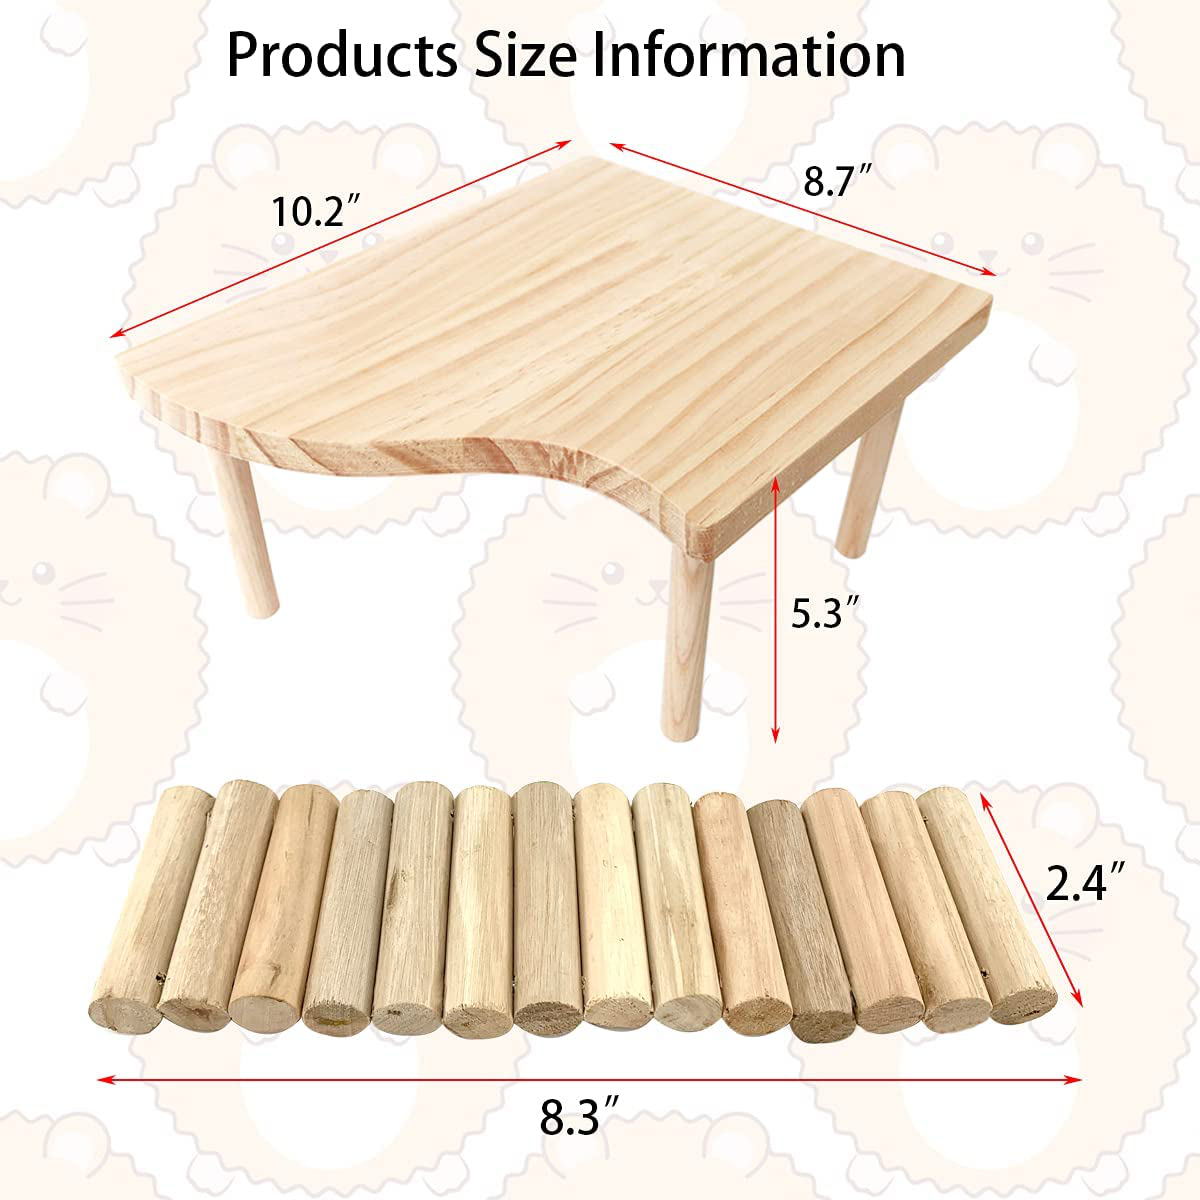 Vehomy 2PCS Hamster Stand Platform Toys Small Pet Wooden Platform with Pillars Rodent Ladder Bridge Rat Climbing Chew Toy Cage Accessories for Hamster Squirrel Gerbil Chinchilla Parrot and Bird Animals & Pet Supplies > Pet Supplies > Bird Supplies > Bird Cages & Stands Vehomy   